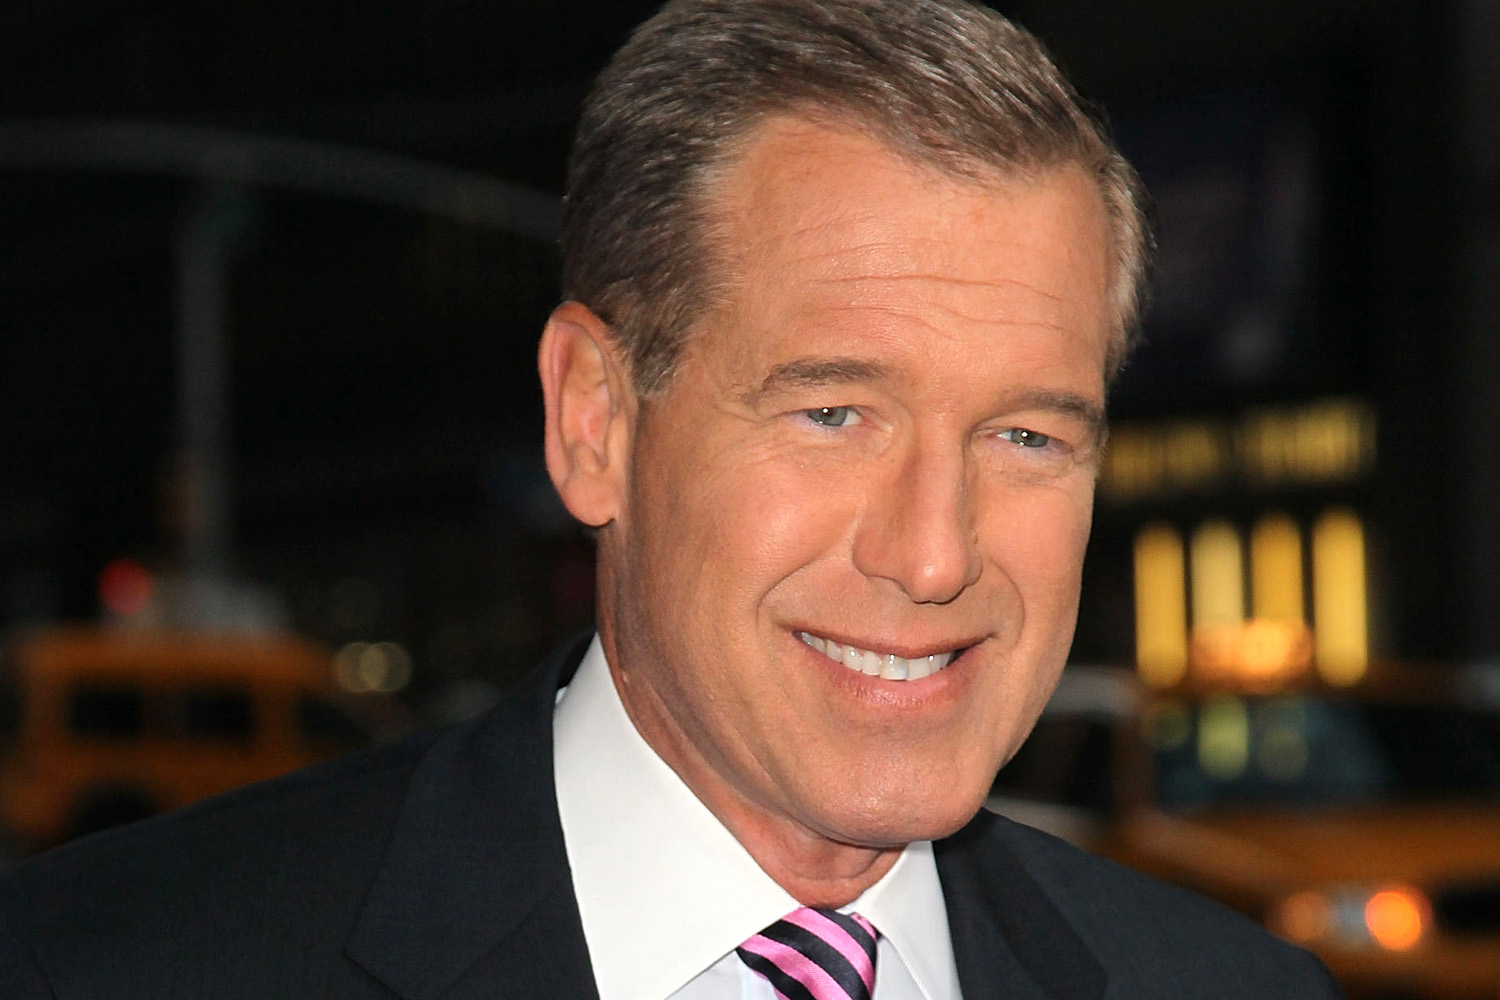 NBC Announces No Further Action on Brian Williams